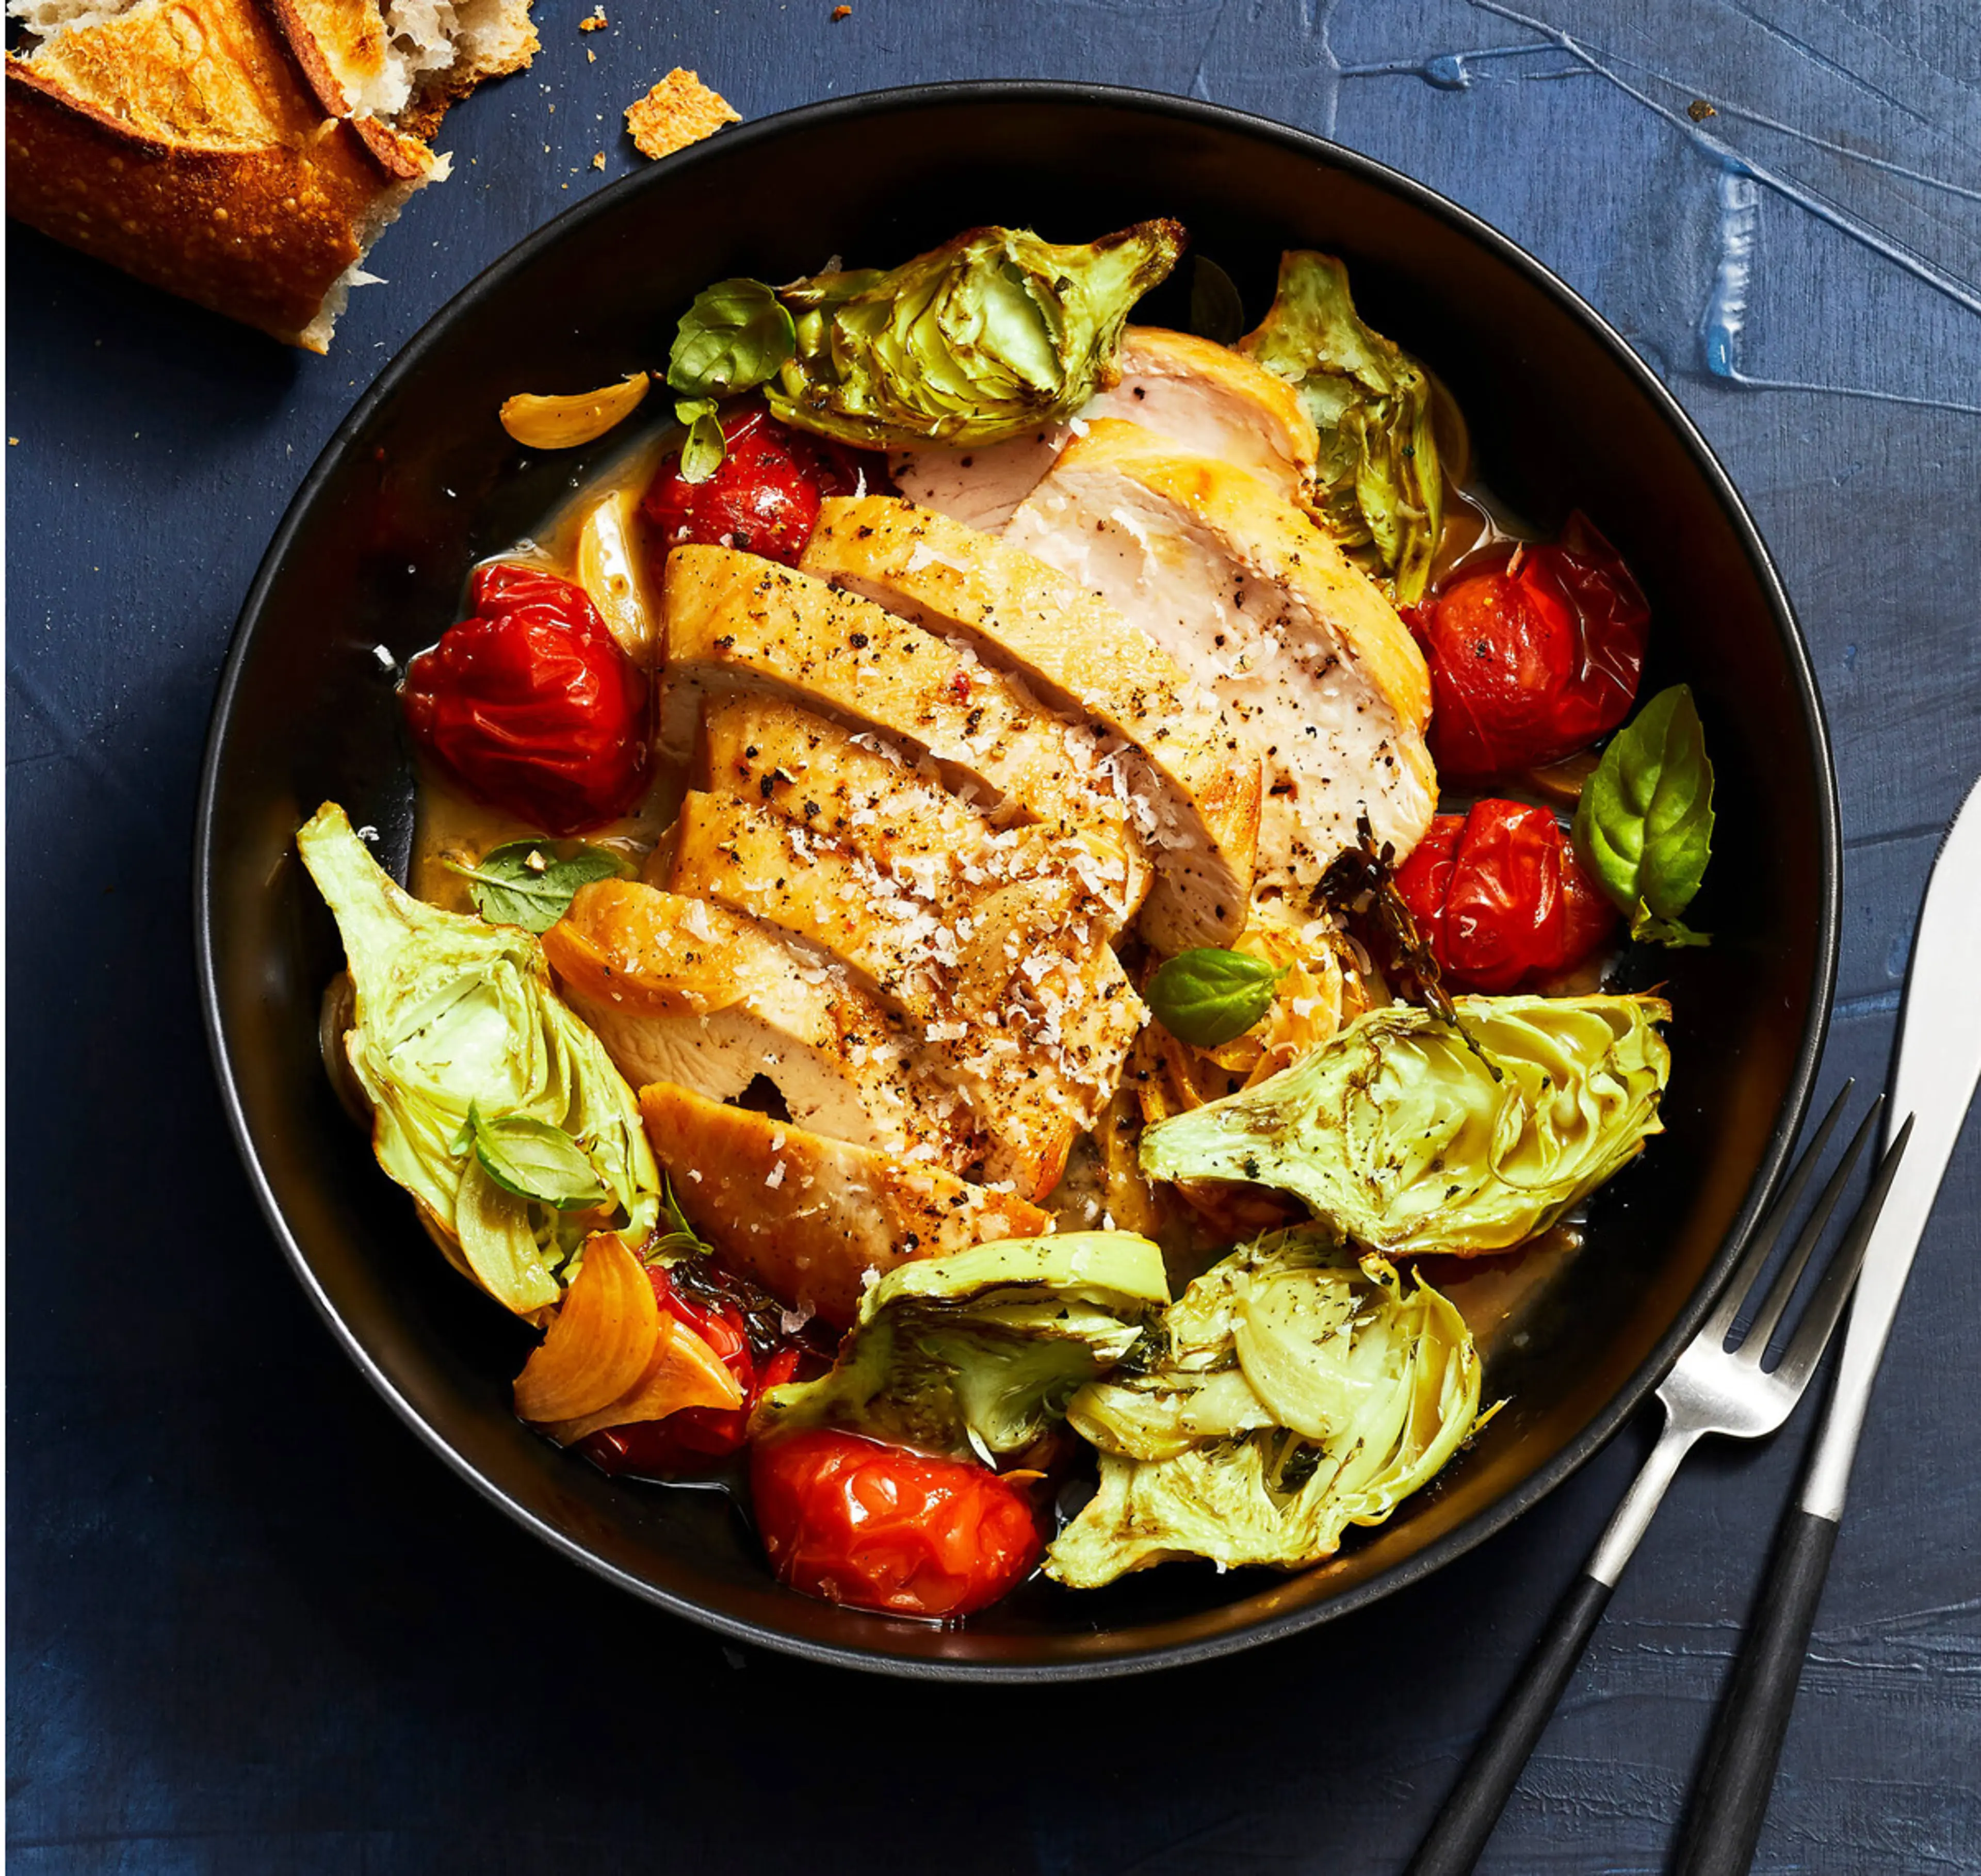 SAUTÉED CHICKEN AND TOMATOES WITH ROASTED ARTICHOKES